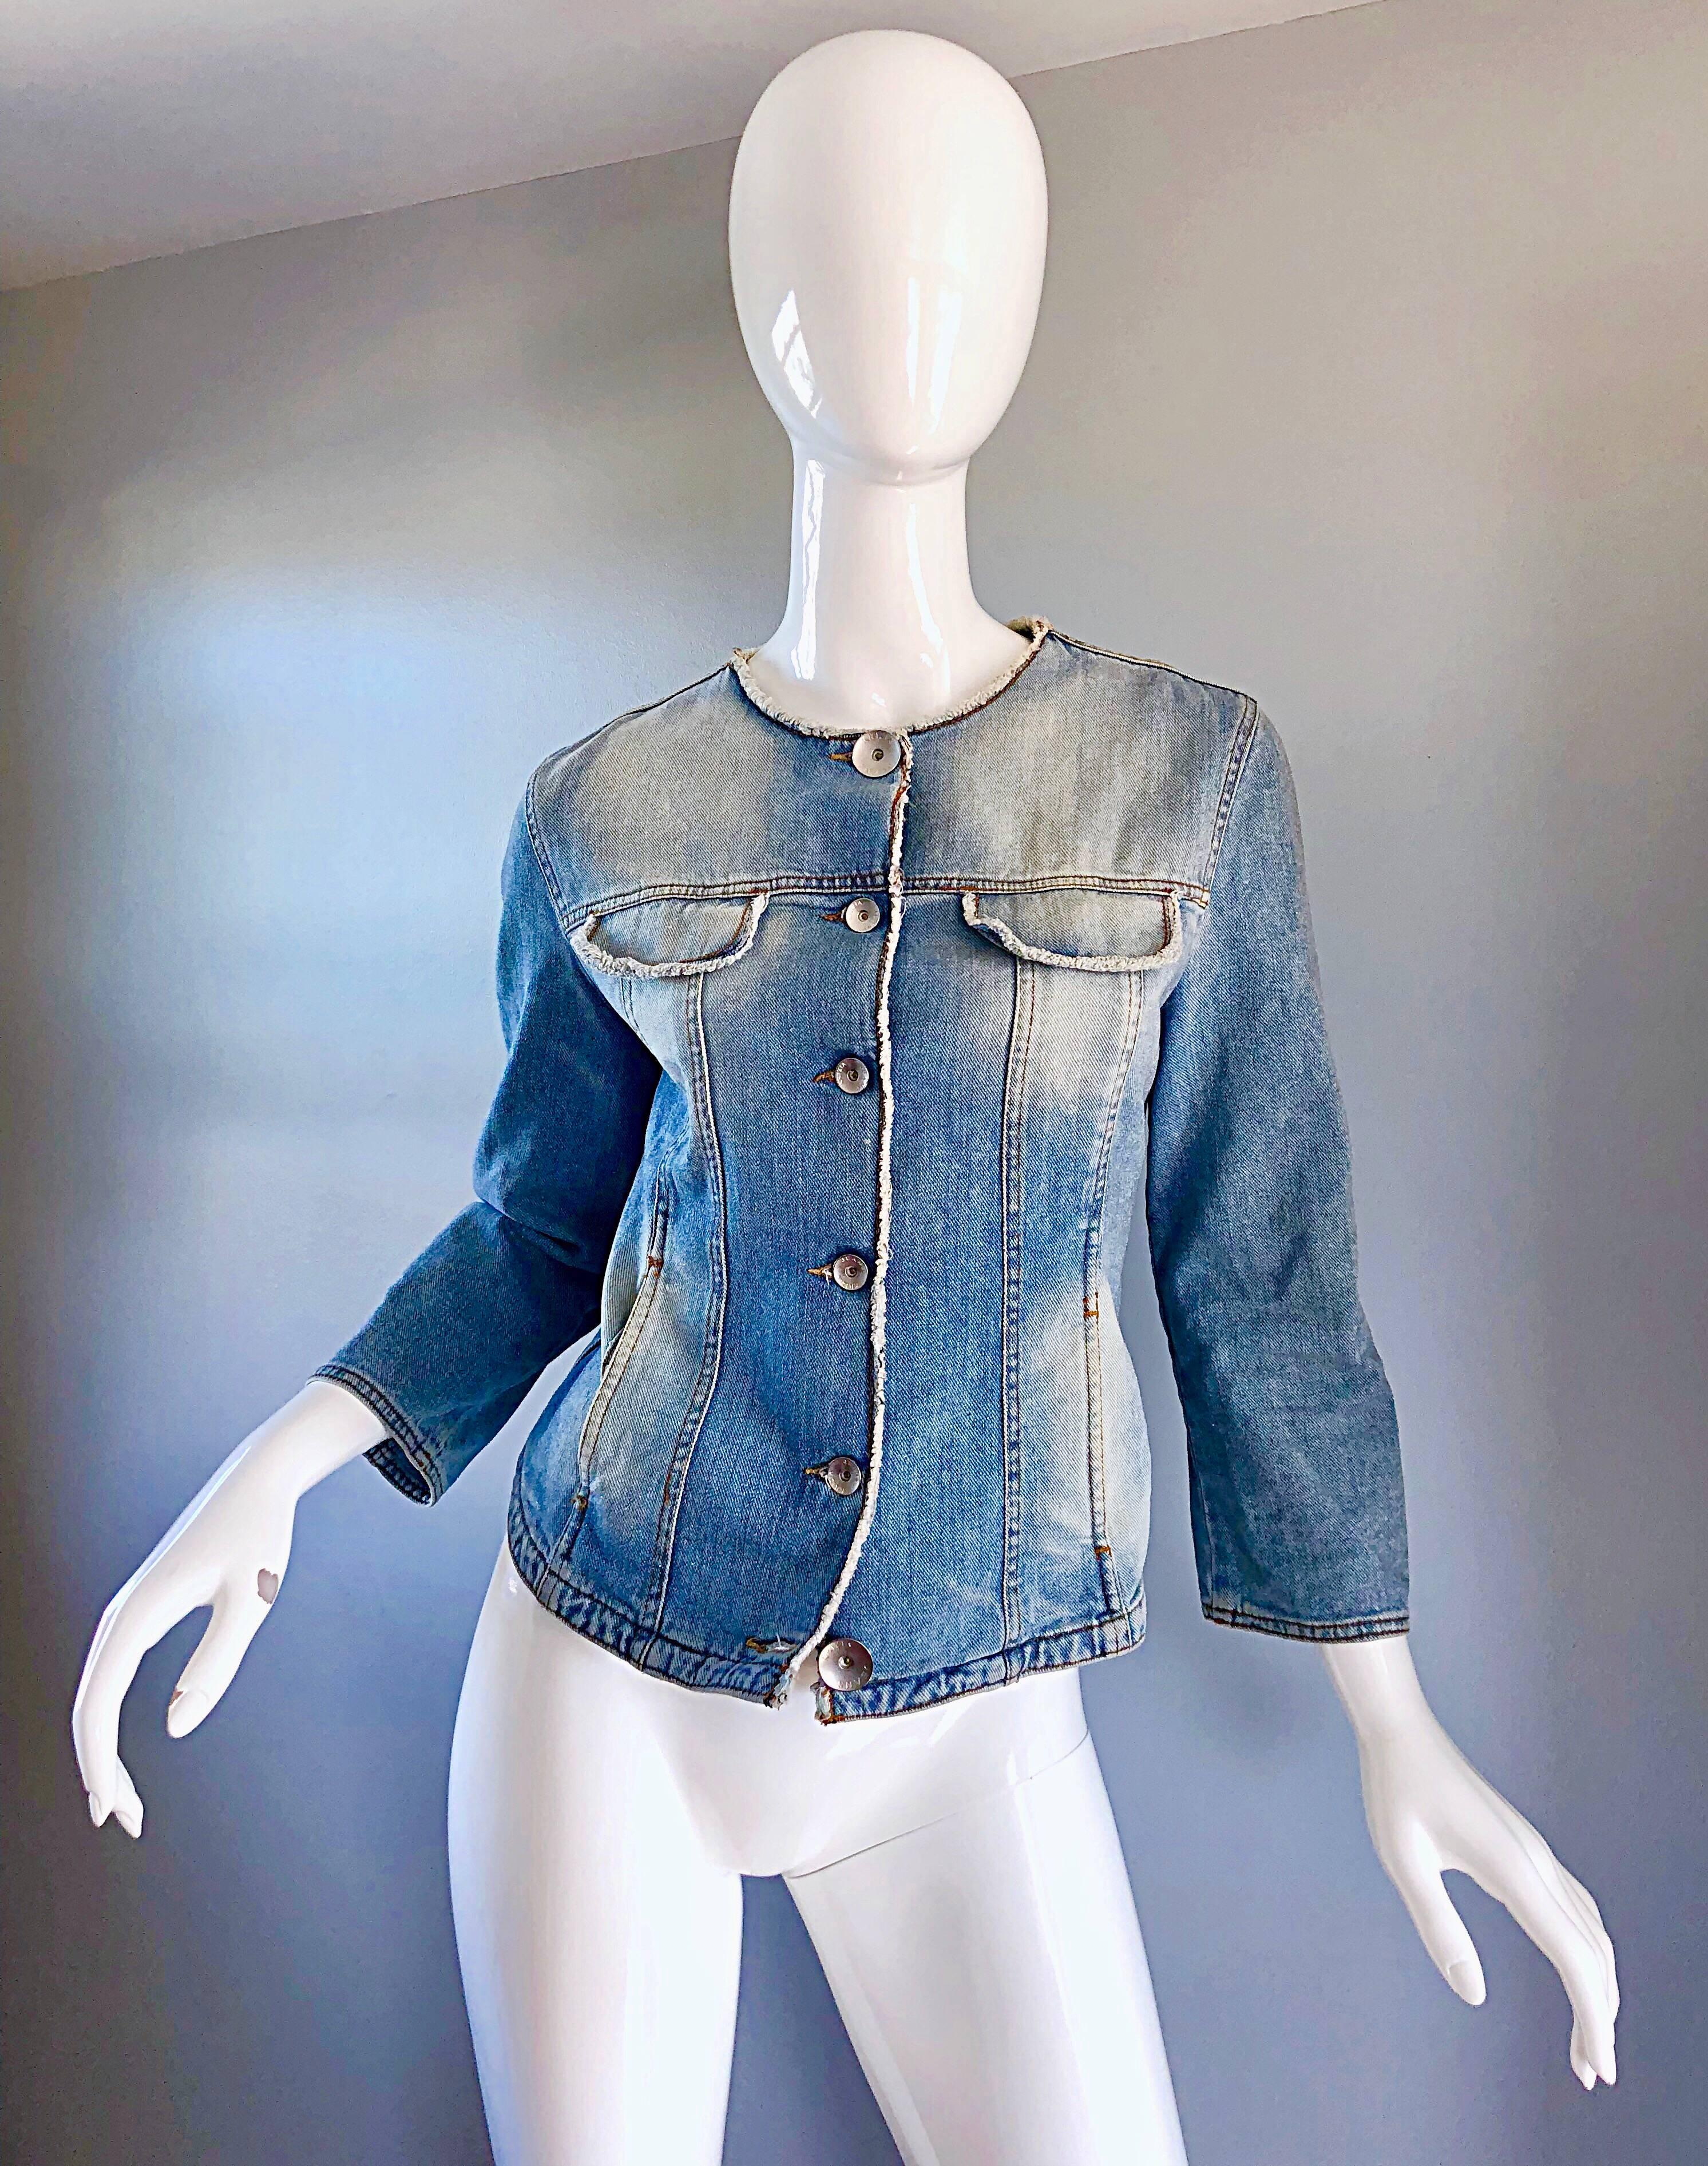 Amazingly chic vintage early 90s KRIZIA blue jean 'glitter' moto jacket! Features a light blue sandblasted denim, with an allover glitter coating (hard to see in photos, but amazing in person). Large matte silver nickel logo embossed buttons up the